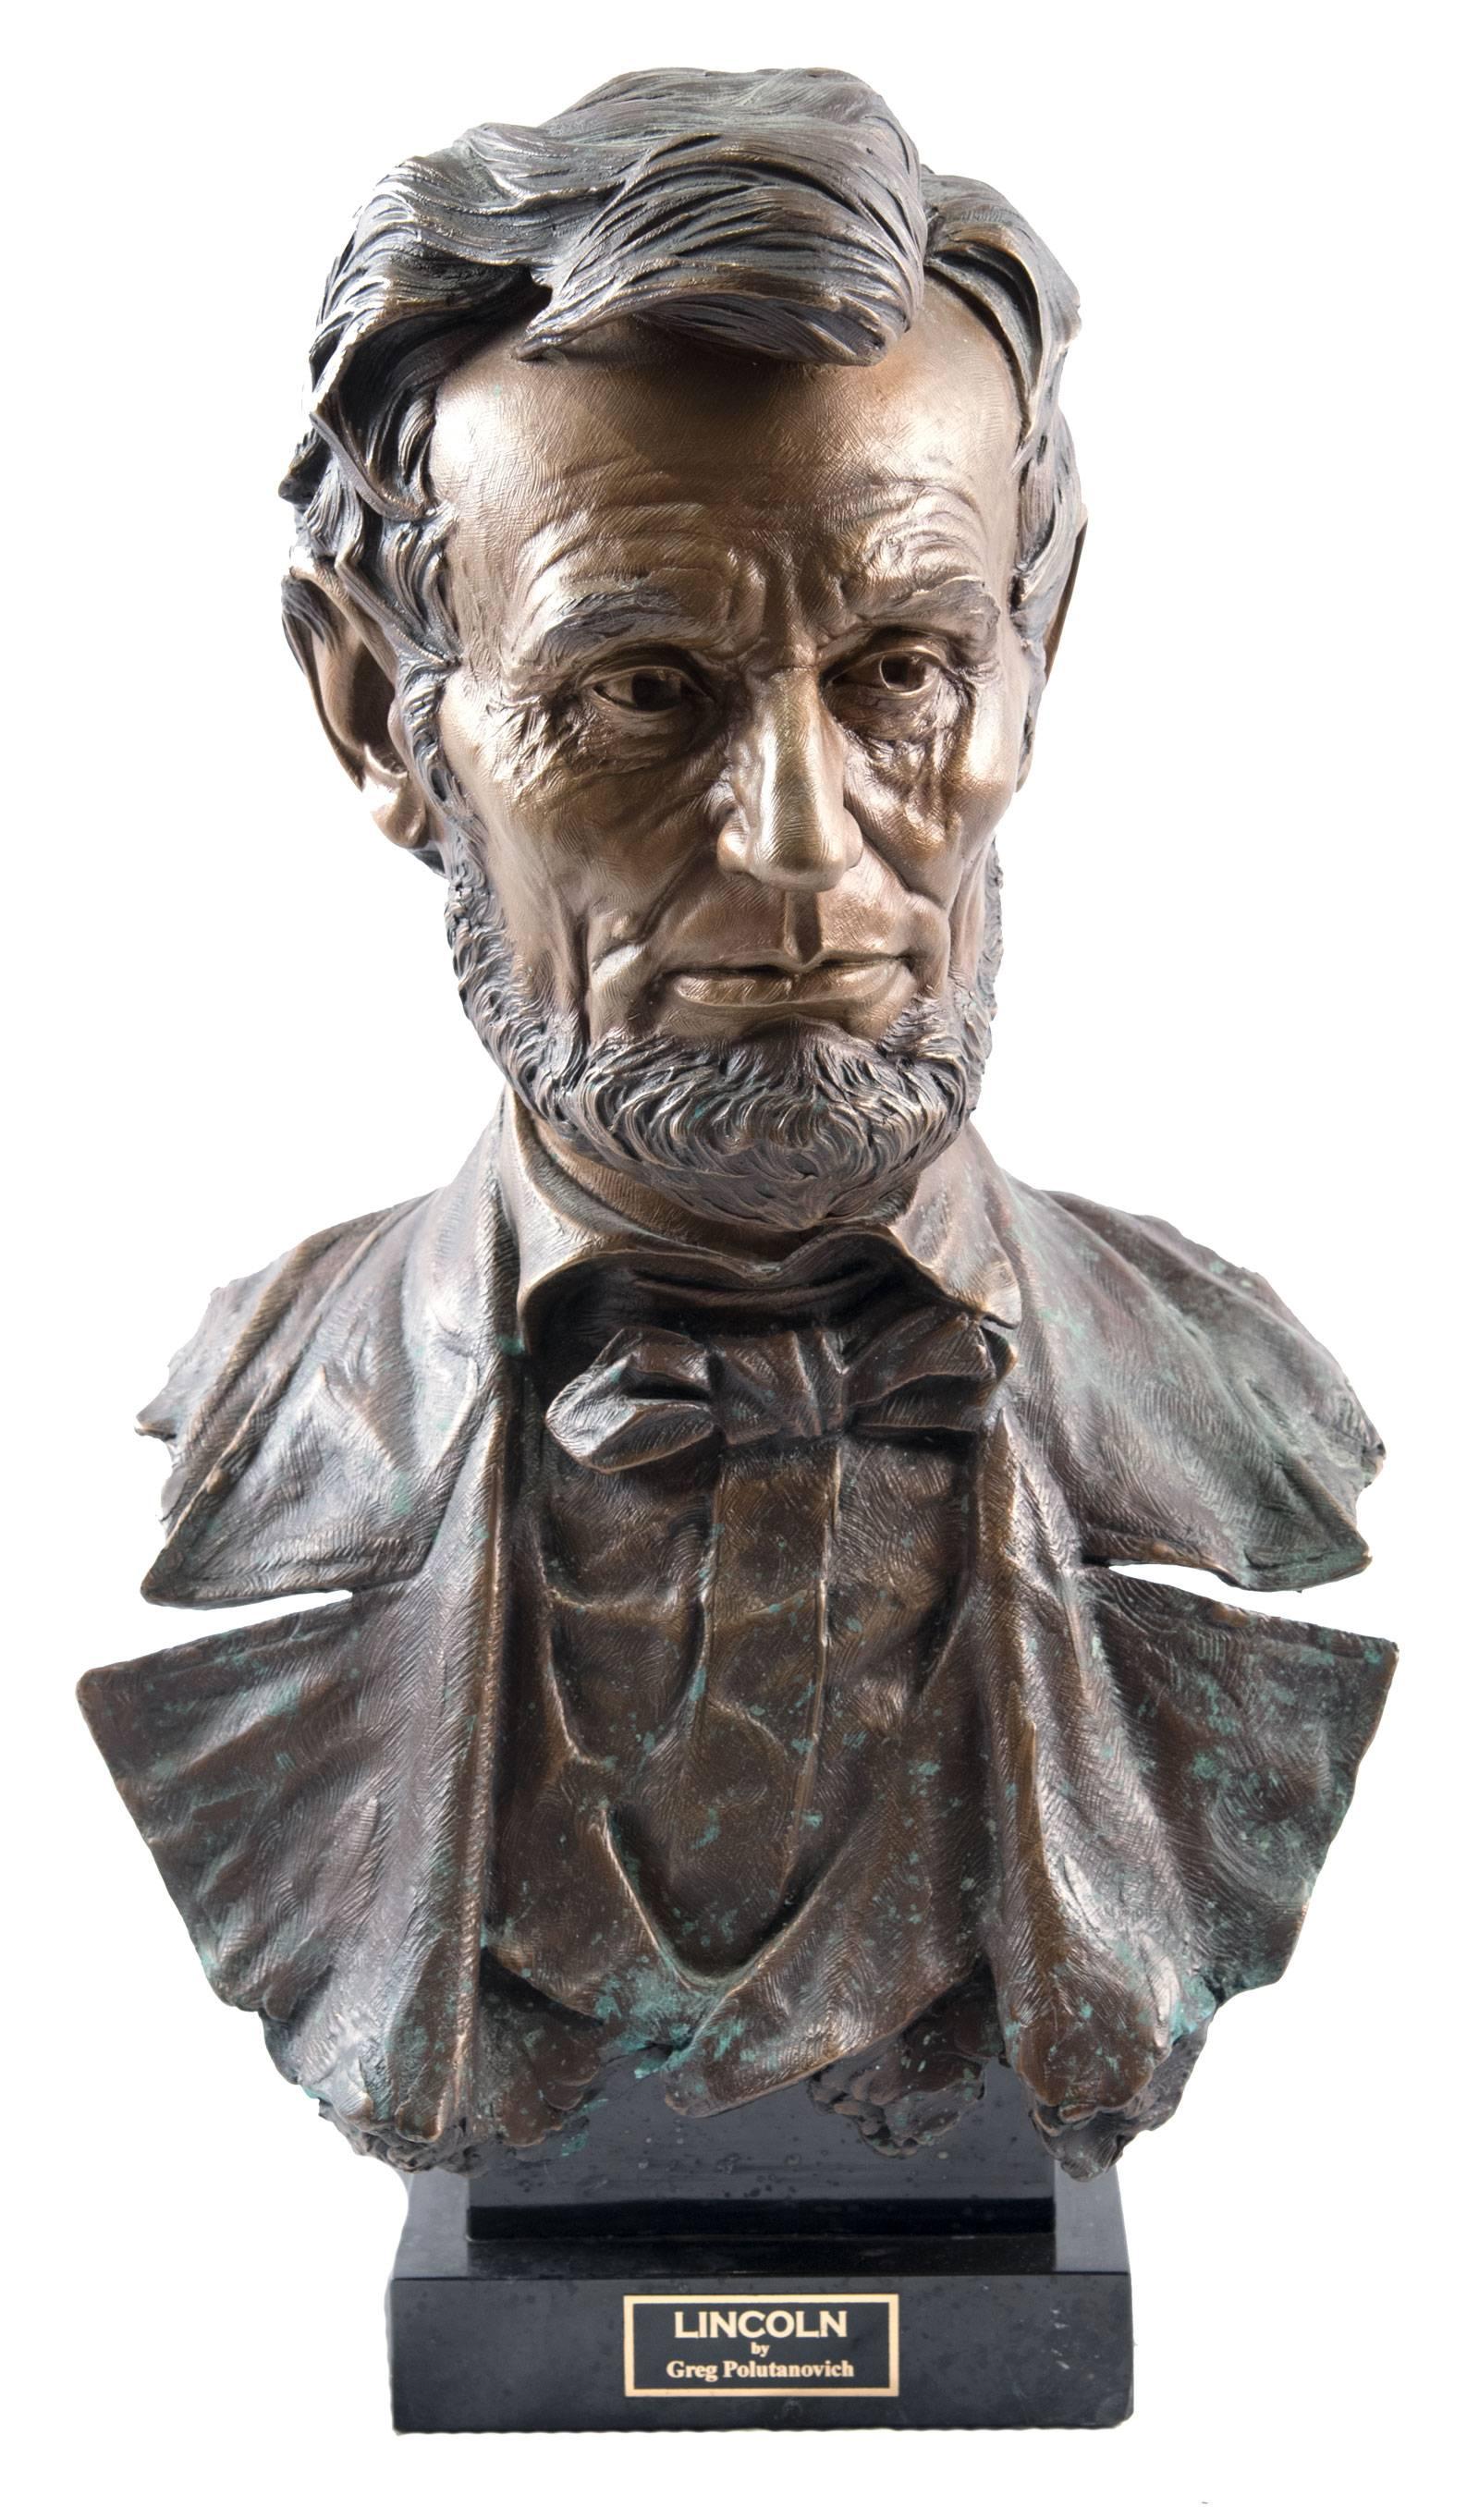 A masterfully sculpted bronze bust of Lincoln mounted on a black marble base by American artist Greg Polutanovich. With an exceptional eye for detail, Polutanovich has created a dramatically realistic and compelling portrait. 

An award-winning